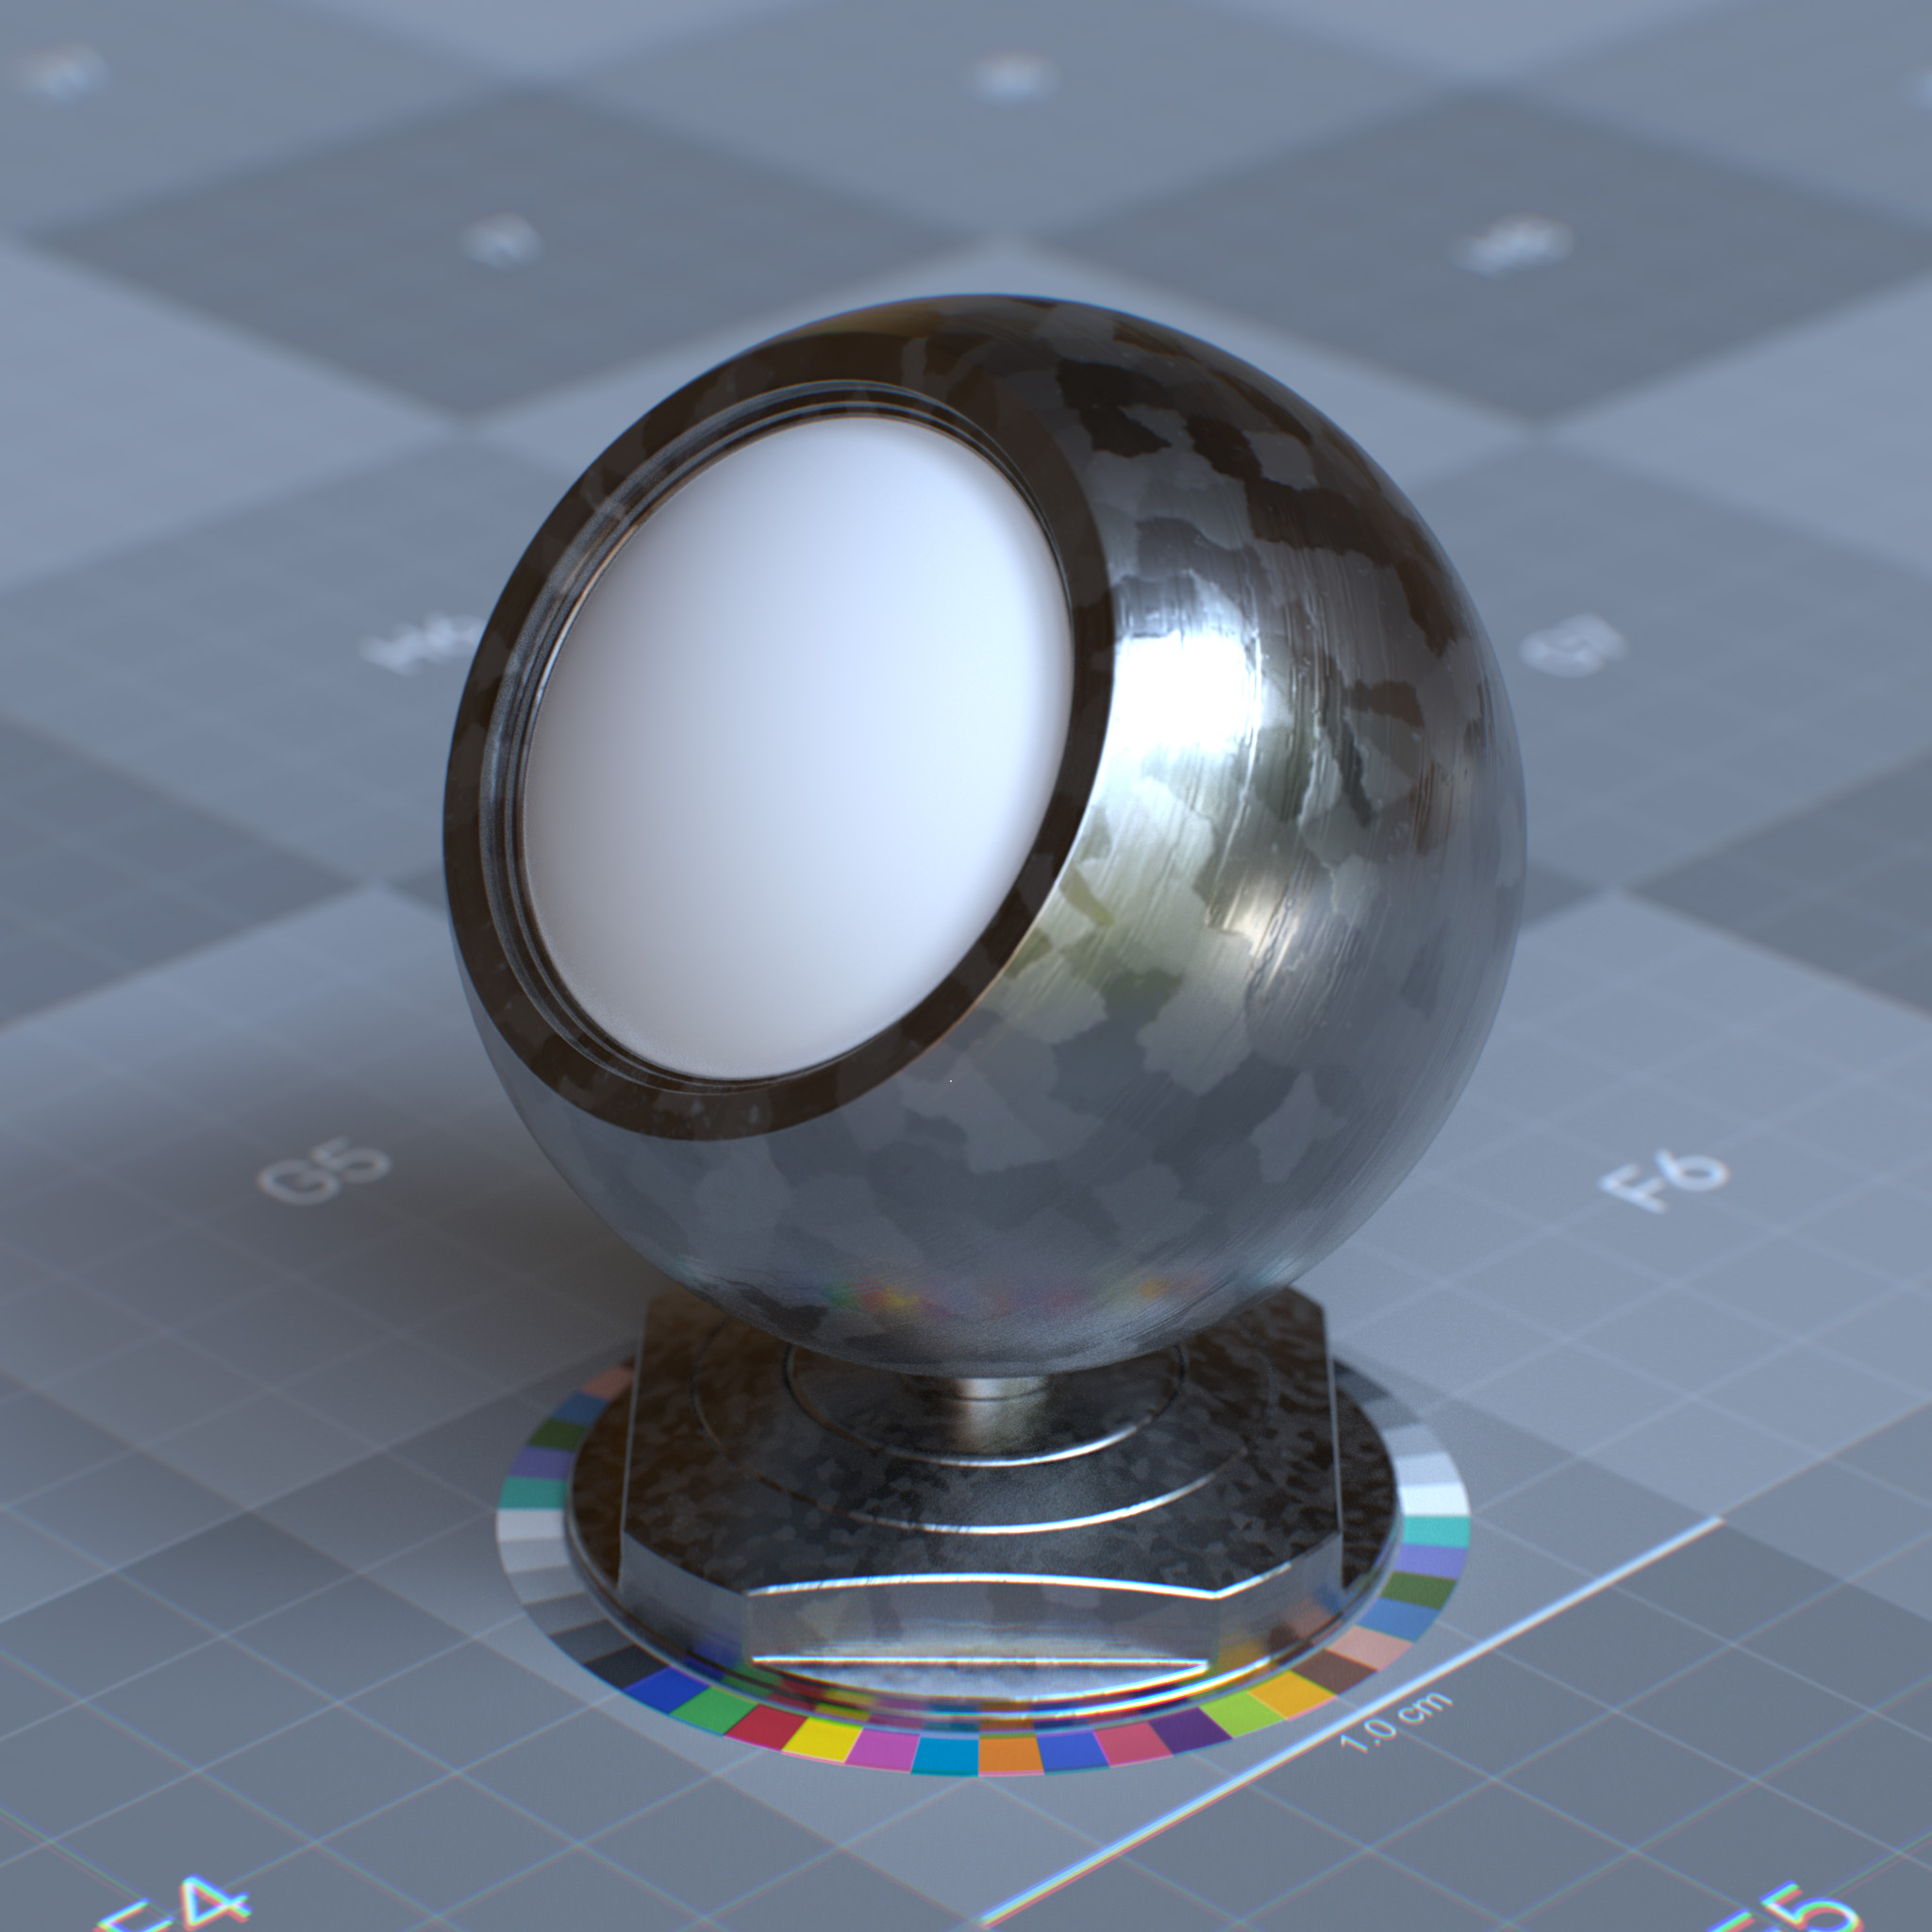 rtx_material_omnisurfacebase_specular_reflection_roughness_galvanized